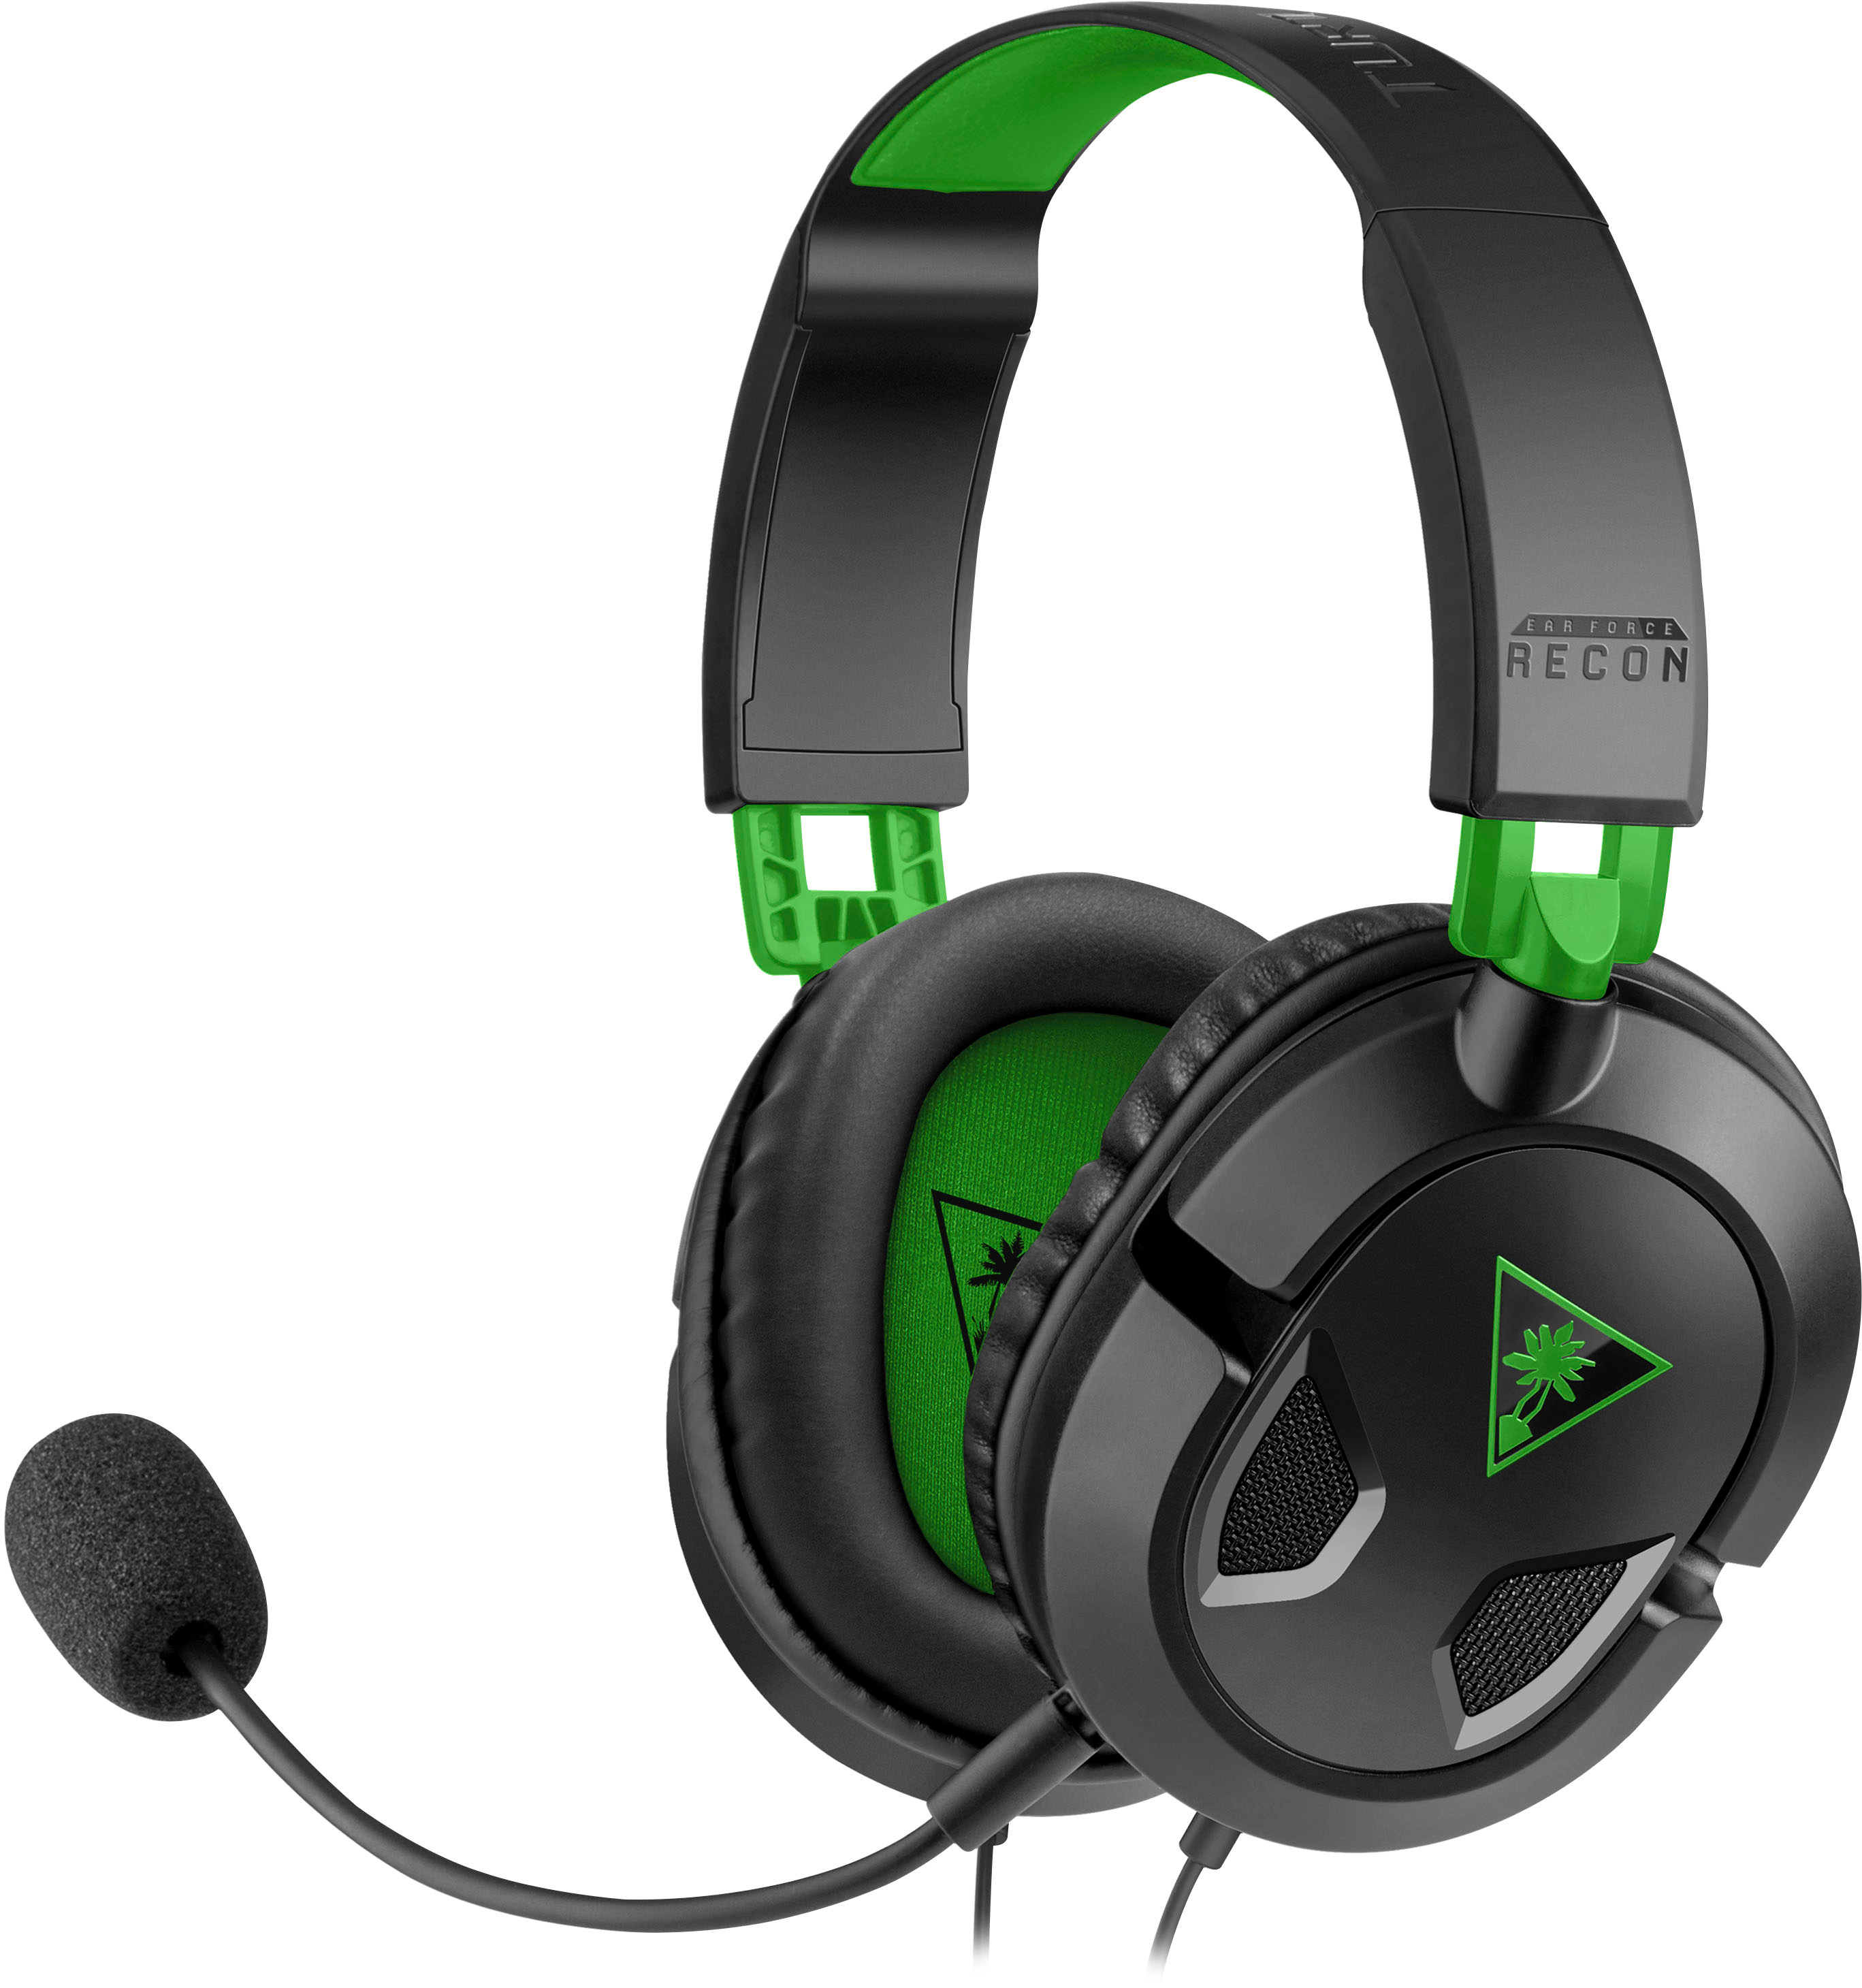 Turtle Beach - Recon 50x 3.5mm Connection Gaming Headset for Xbox Series X|S, Xbox One, PS5, PS4, Nintendo Switch, Mobile & PC - Black/Green